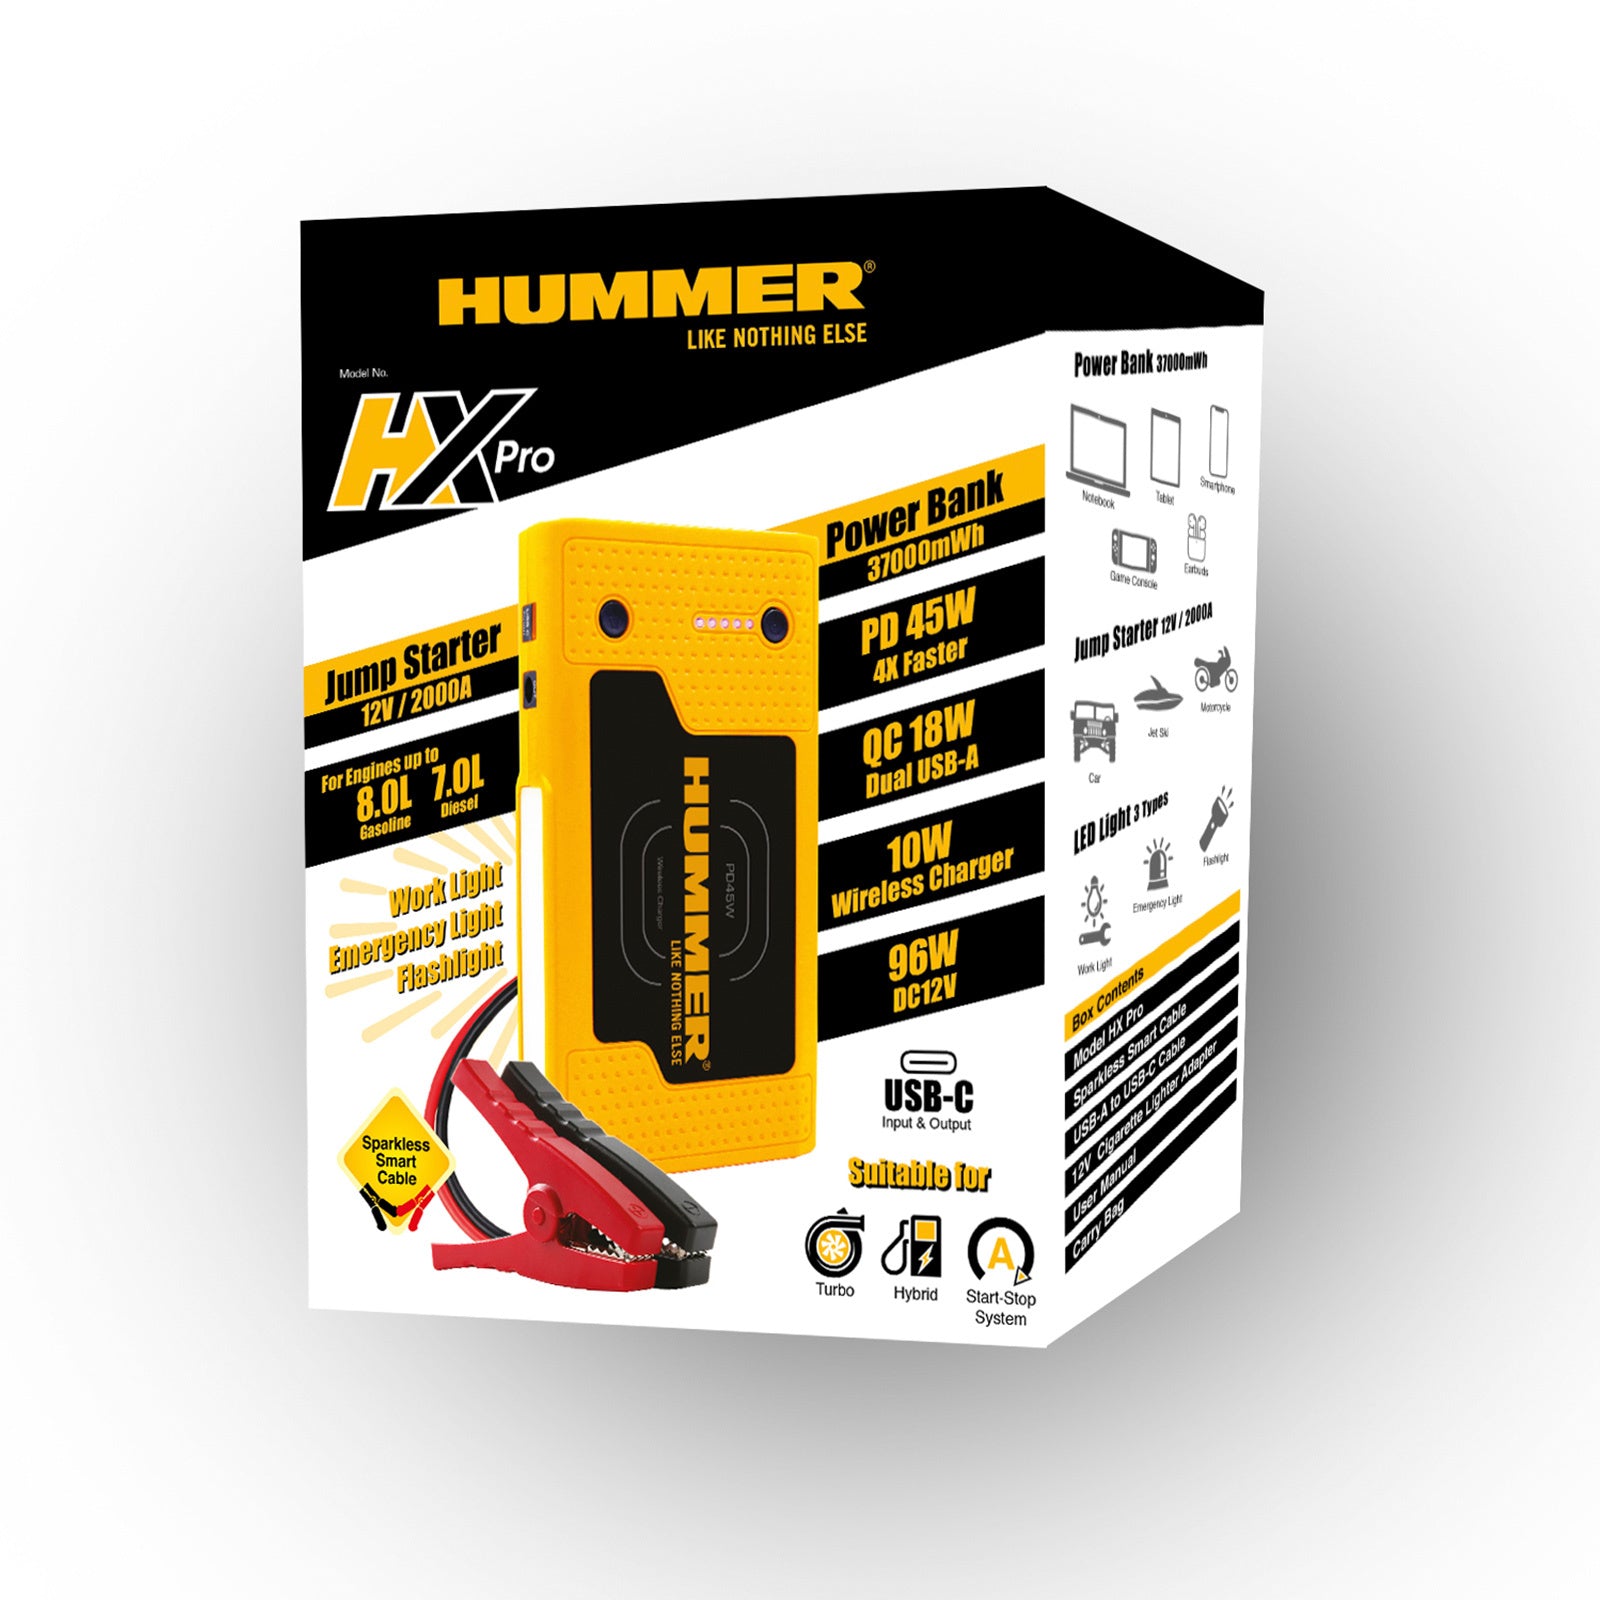 Hummer HX Pro 2000A Jump Starter Powerbank 37000mWh 12V Car Battery Charger LED